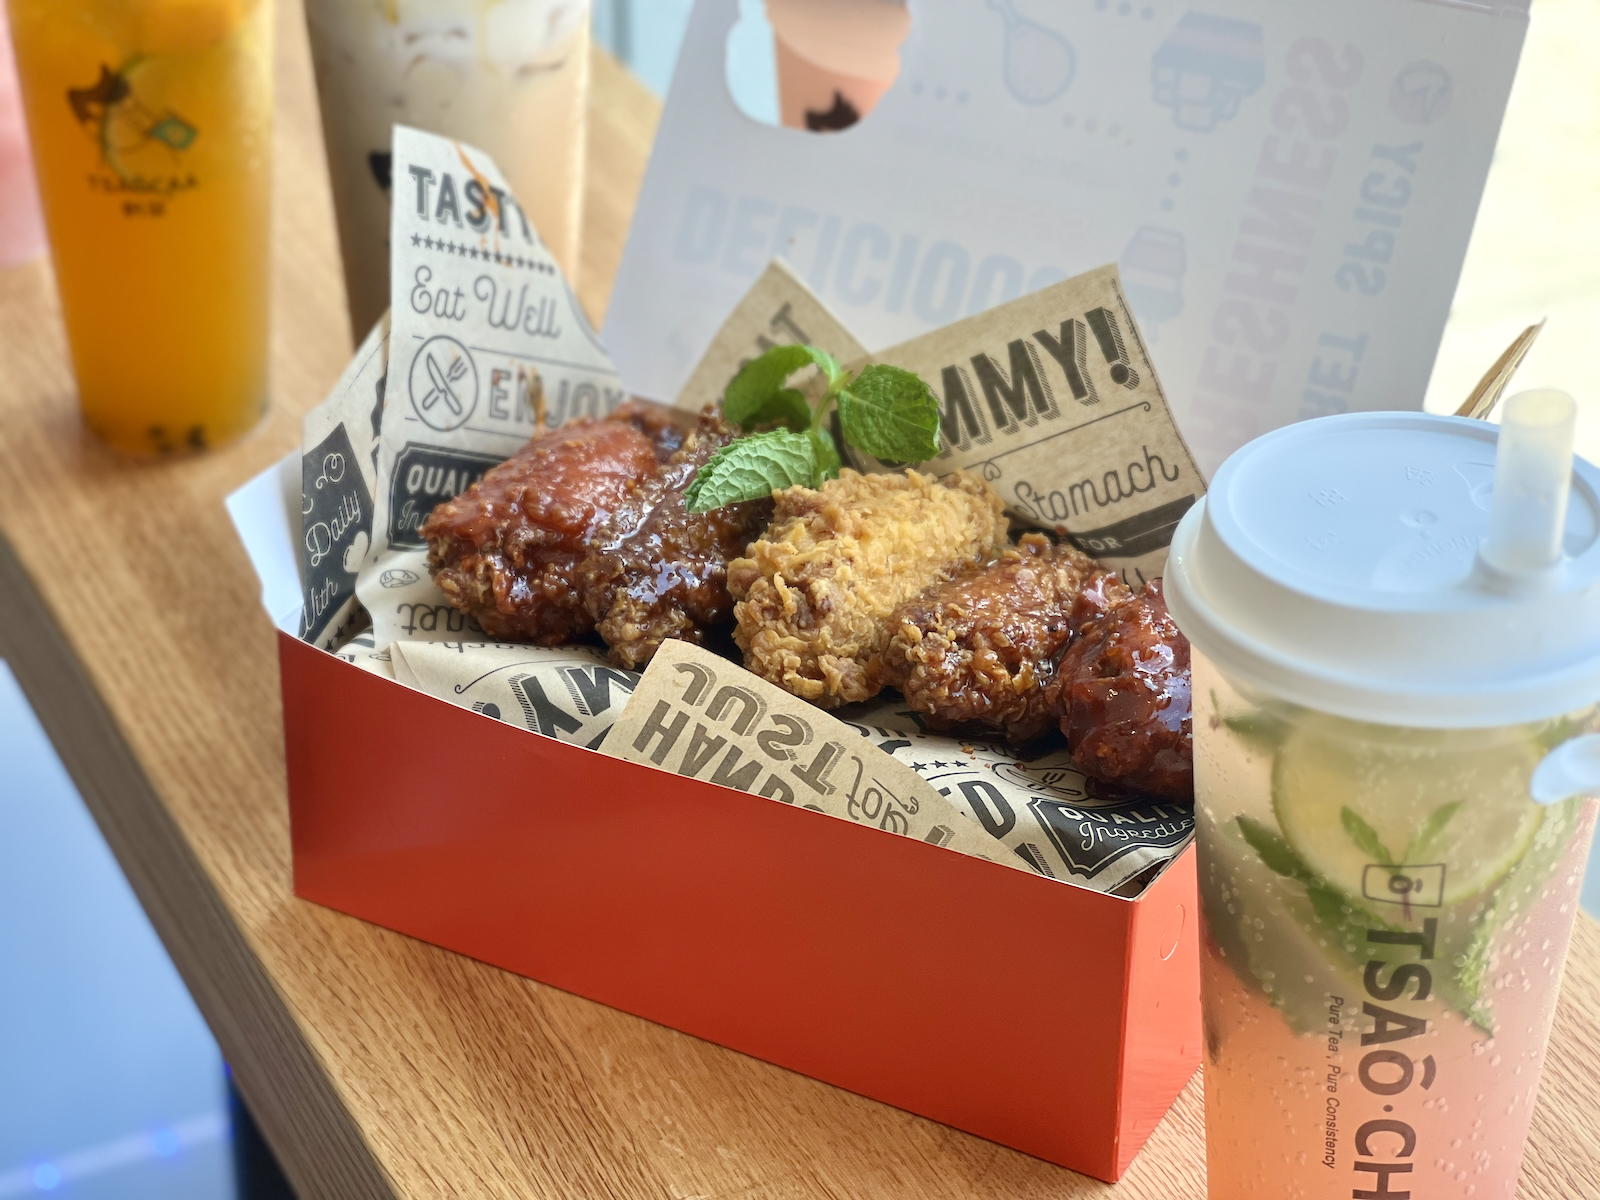 Chicken wings and bubble tea